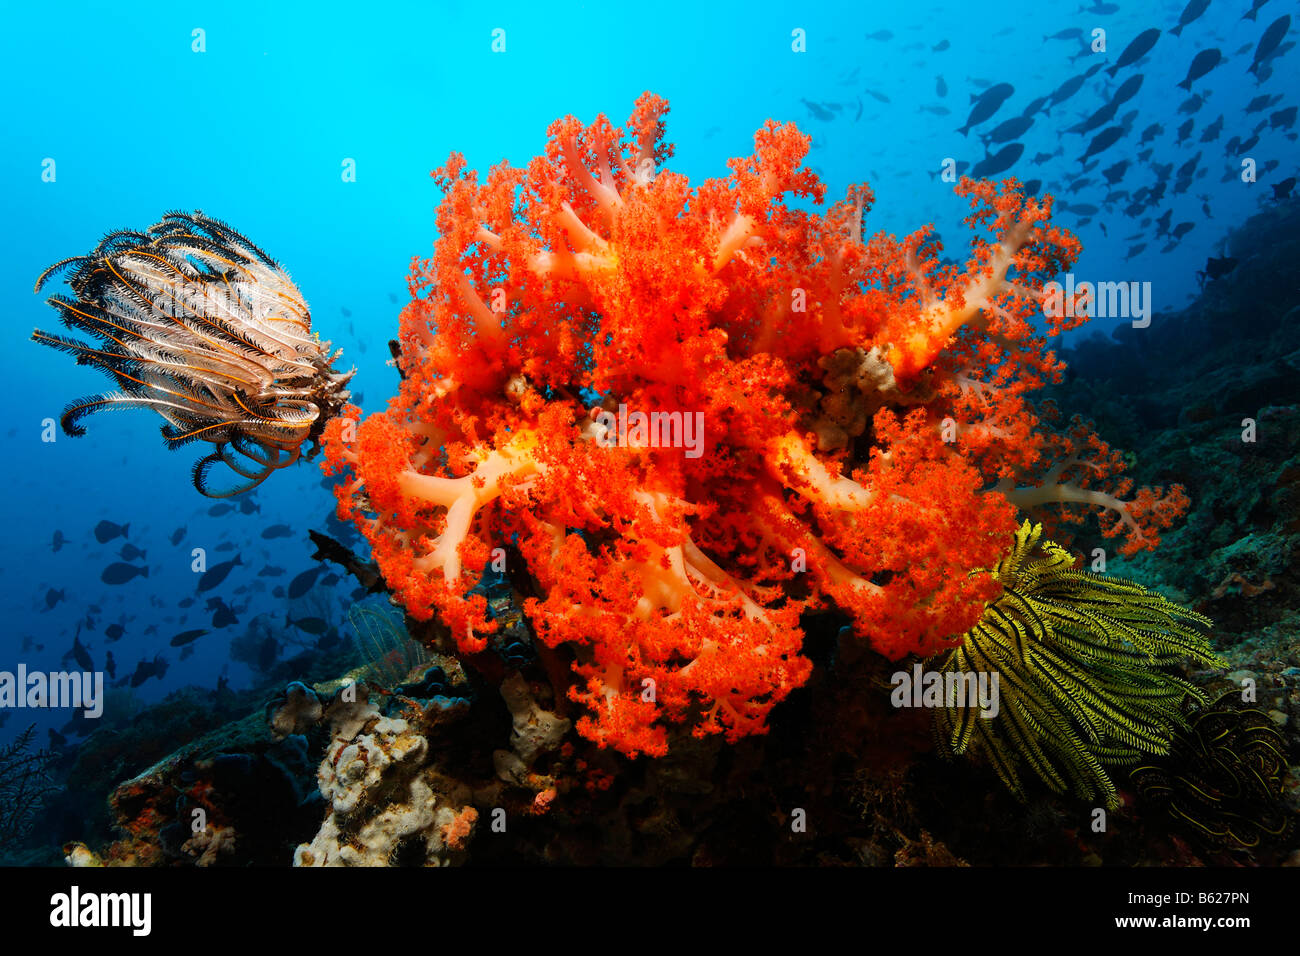 Underwater landscape with red Soft Coral (Umbellulifera sp) Black Crinoid, Sea Lily or Feather-star (Oxycomanthus bennetti) and Stock Photo